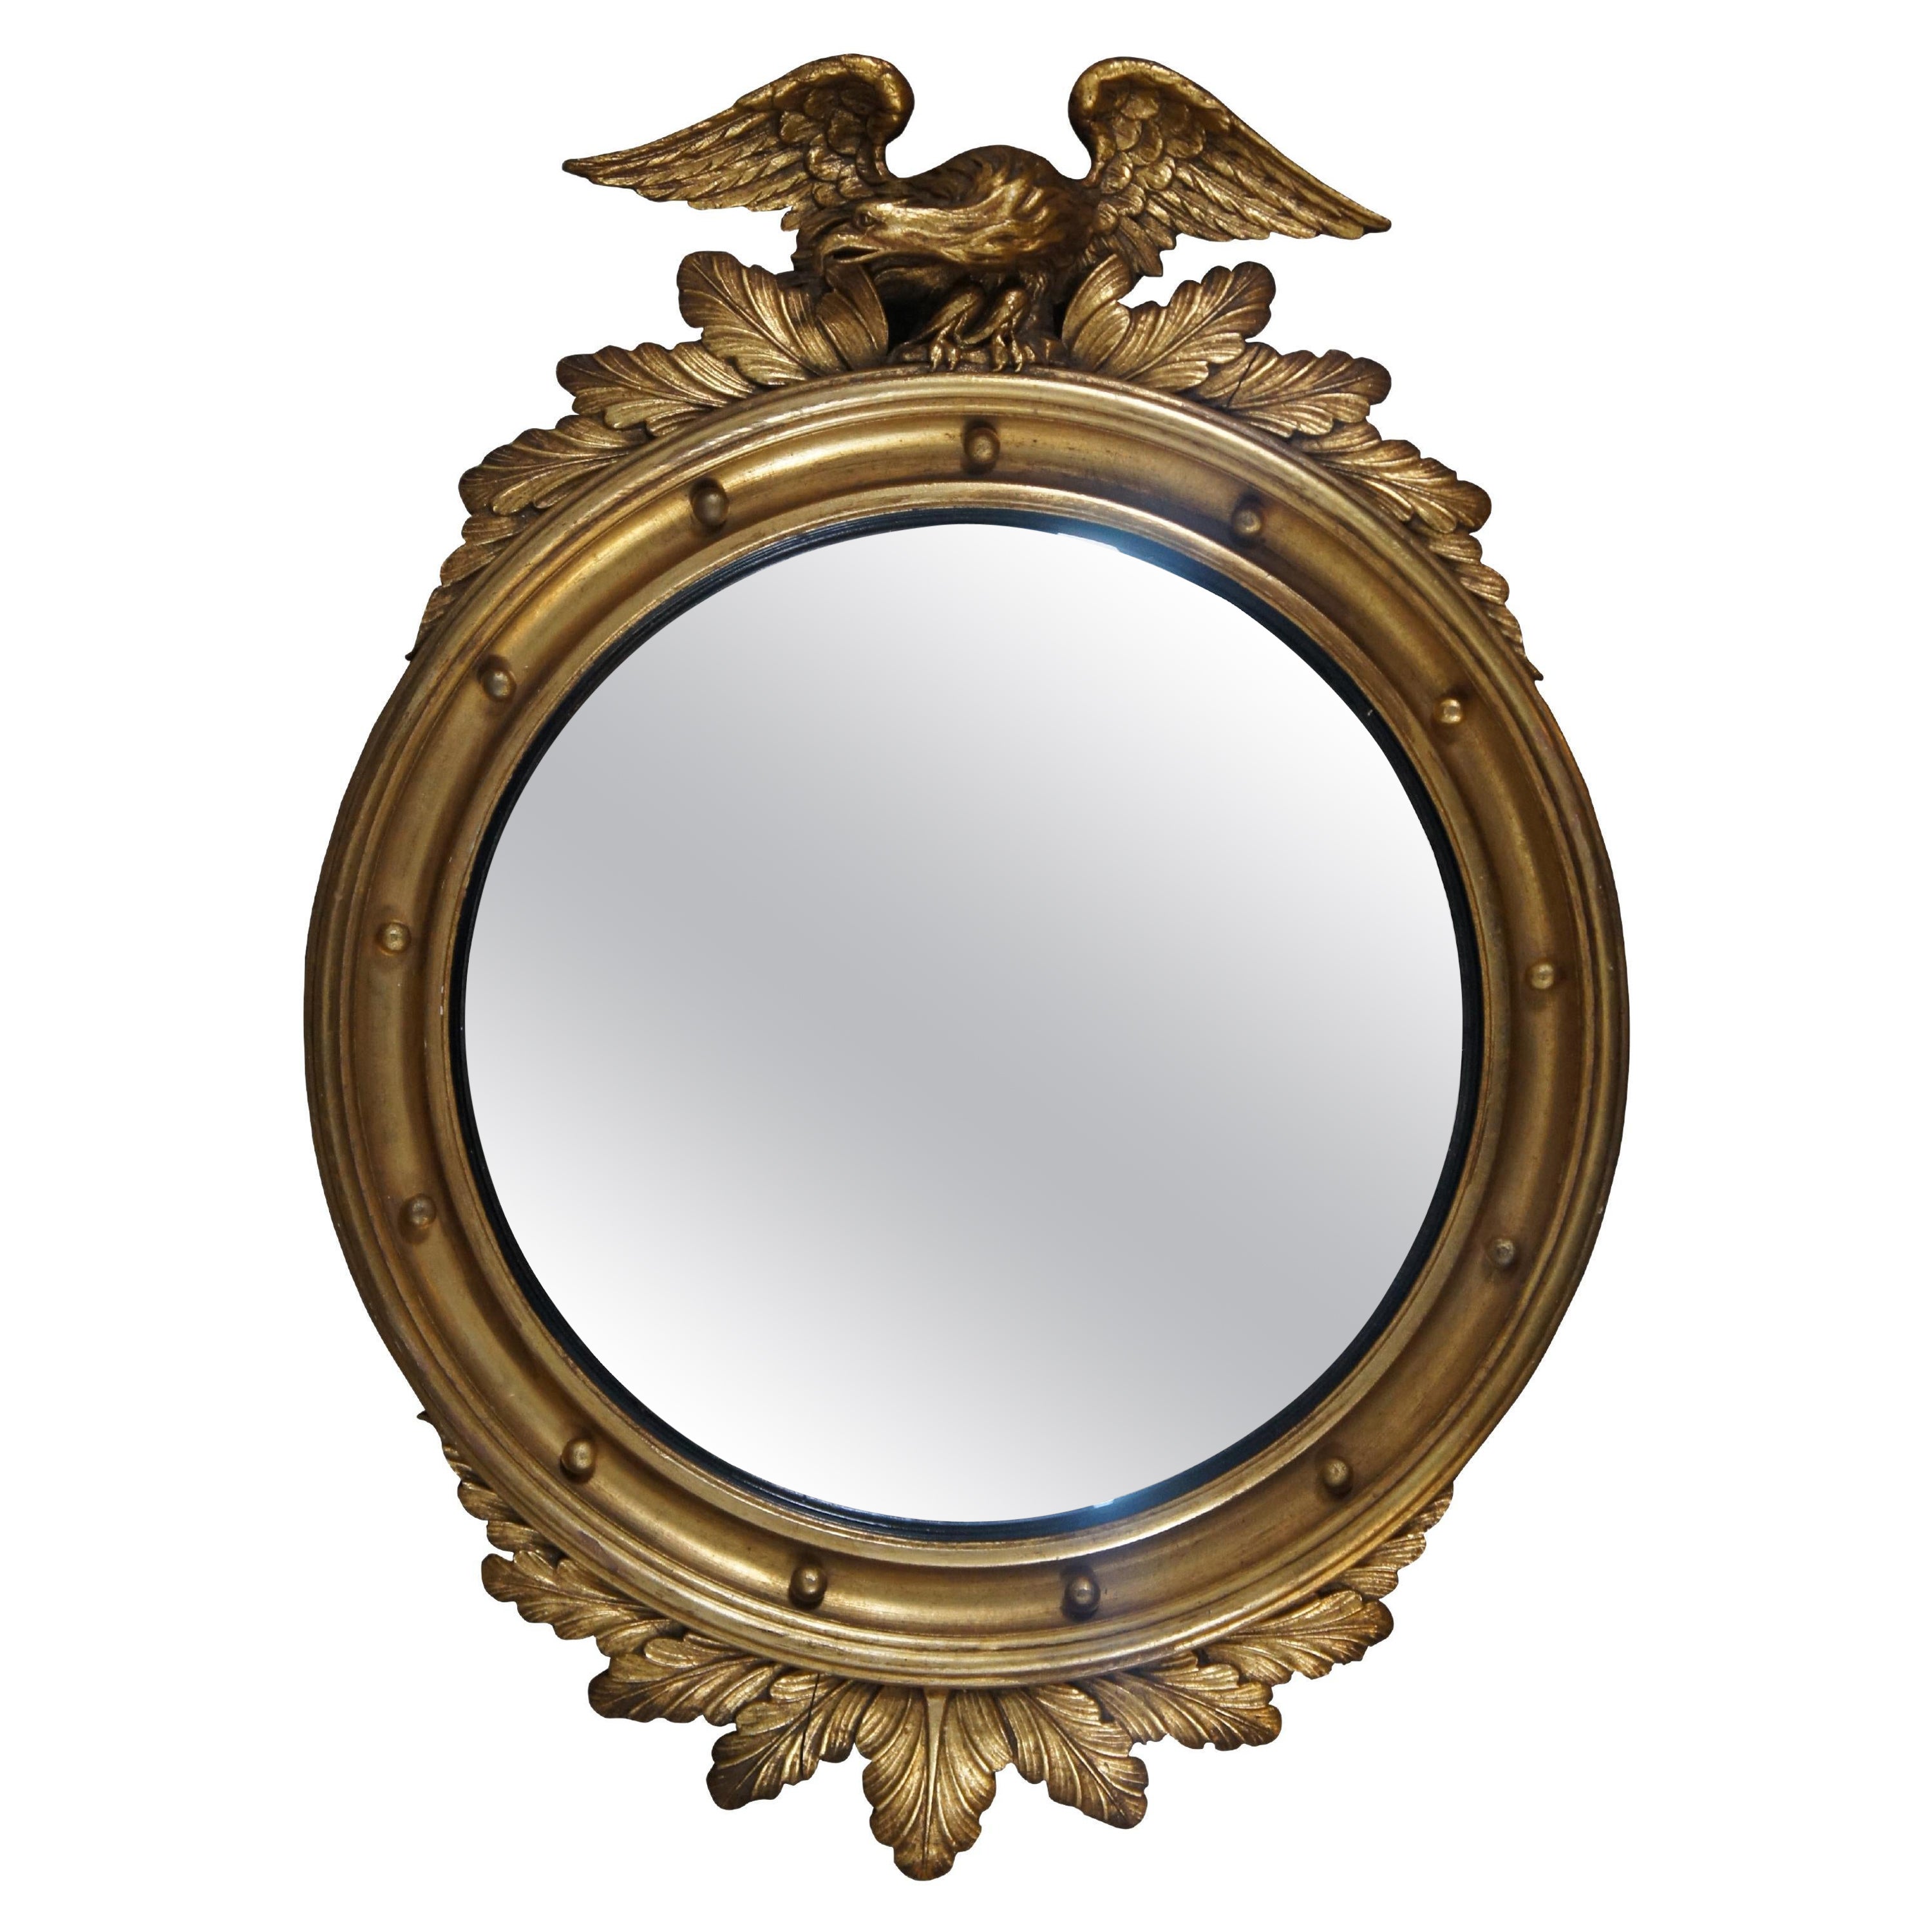 Antique 19th Century Federal Giltwood Convex Bullseye Eagle Acanthus Mirror 31" For Sale